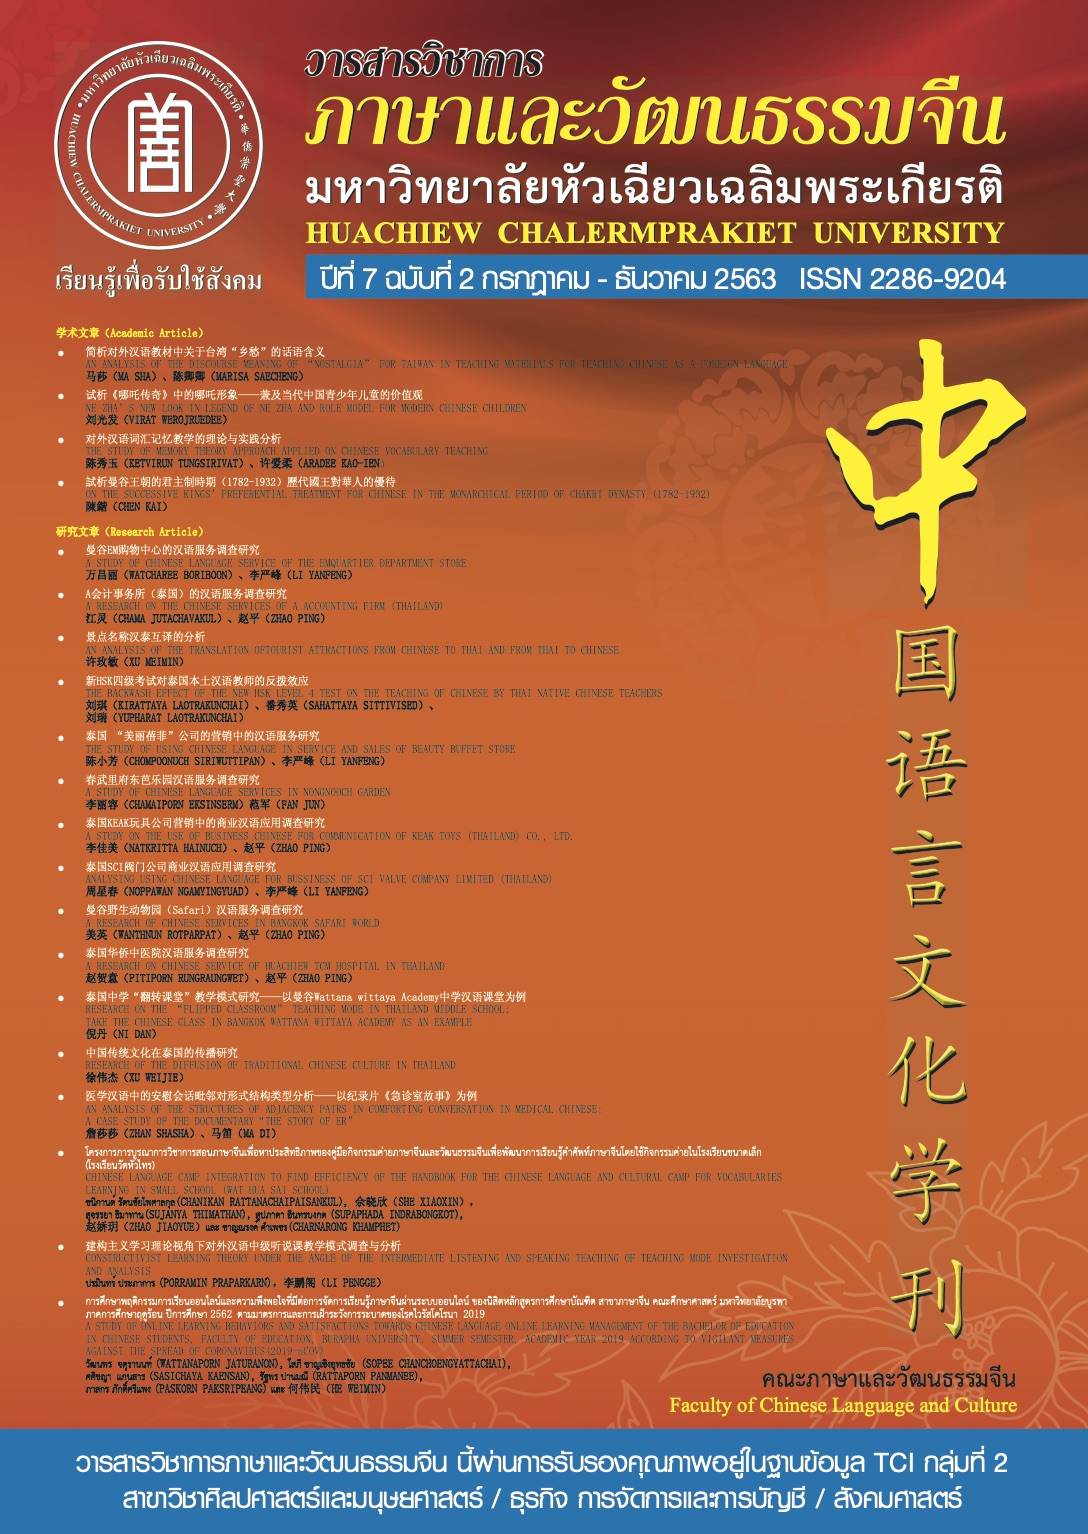 					View Vol. 7 No. 2 (2020): Year 7 Vol.2 Journal of Faculty of Chinese Language and Culture (Jul - Dec 2020)
				